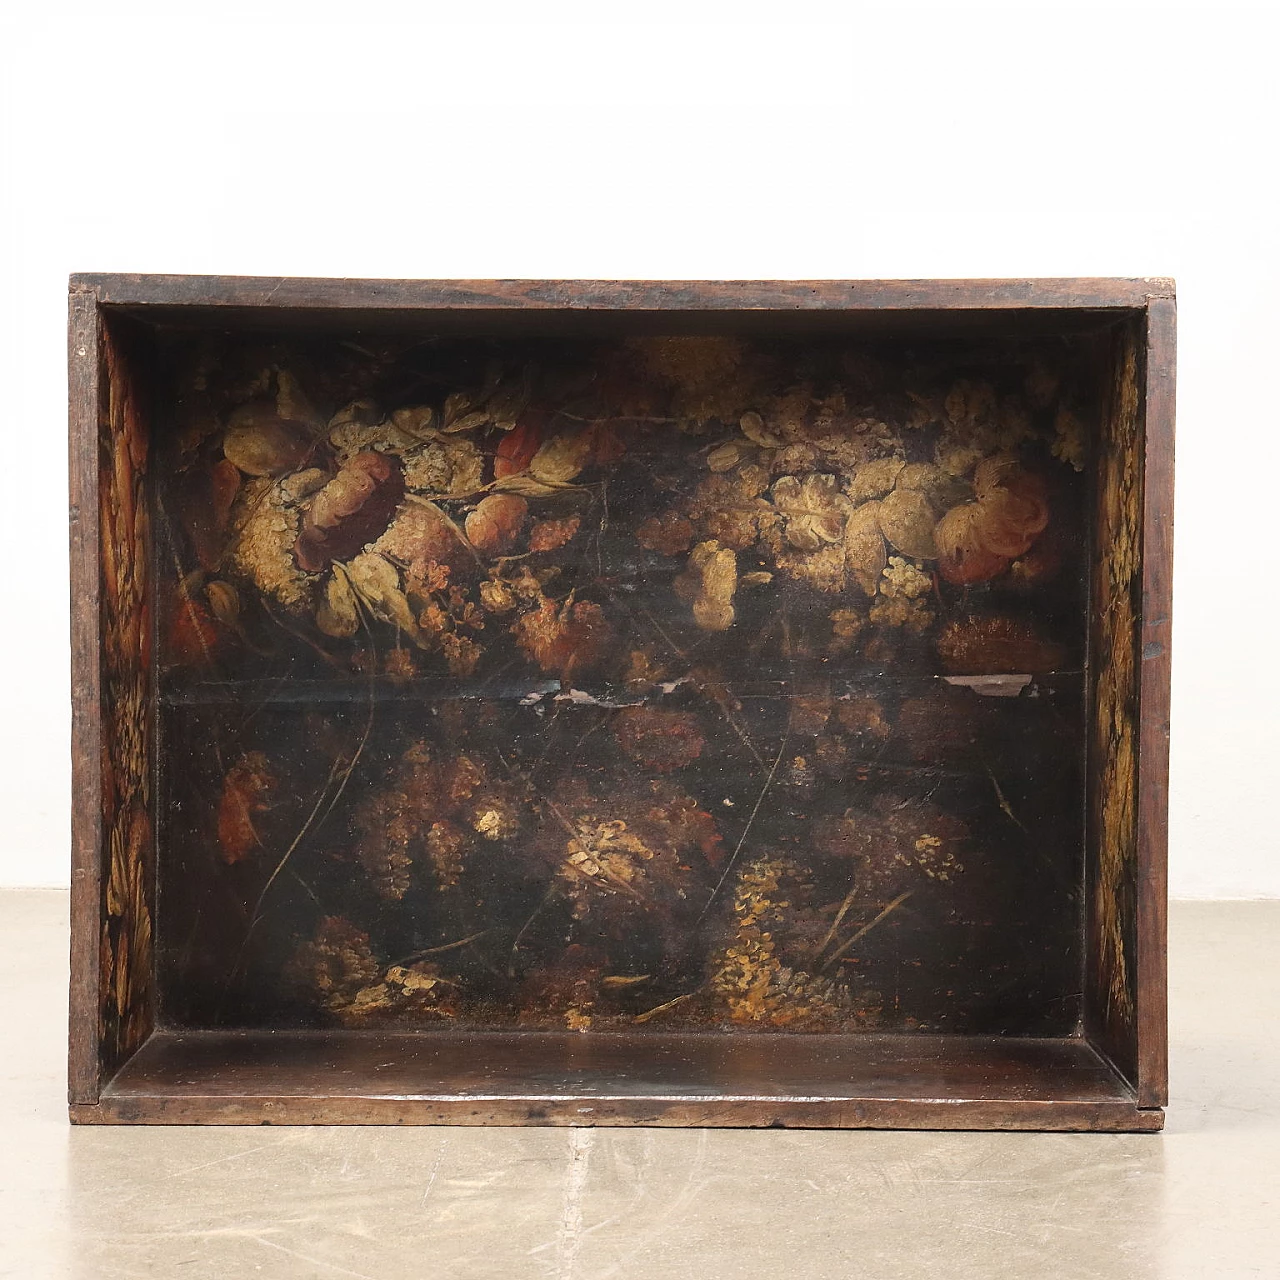 Walnut case painted with floral depictions, 18th century 3